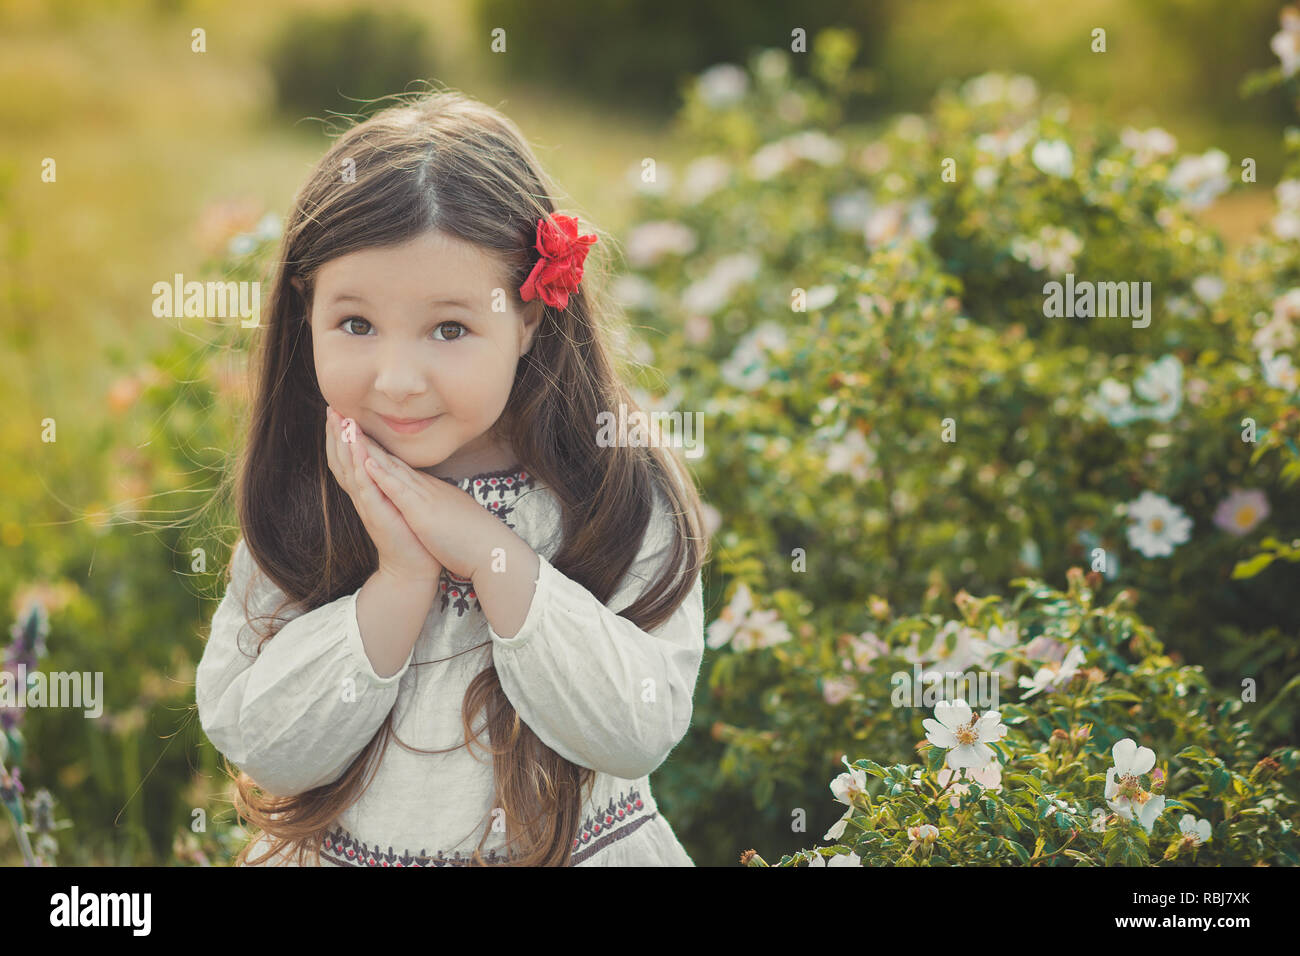 Girl with brunette hair and brown eyes stylish dressed wearing rustic village clothes white shirt and red pants on belt posing with flowers in forest  Stock Photo